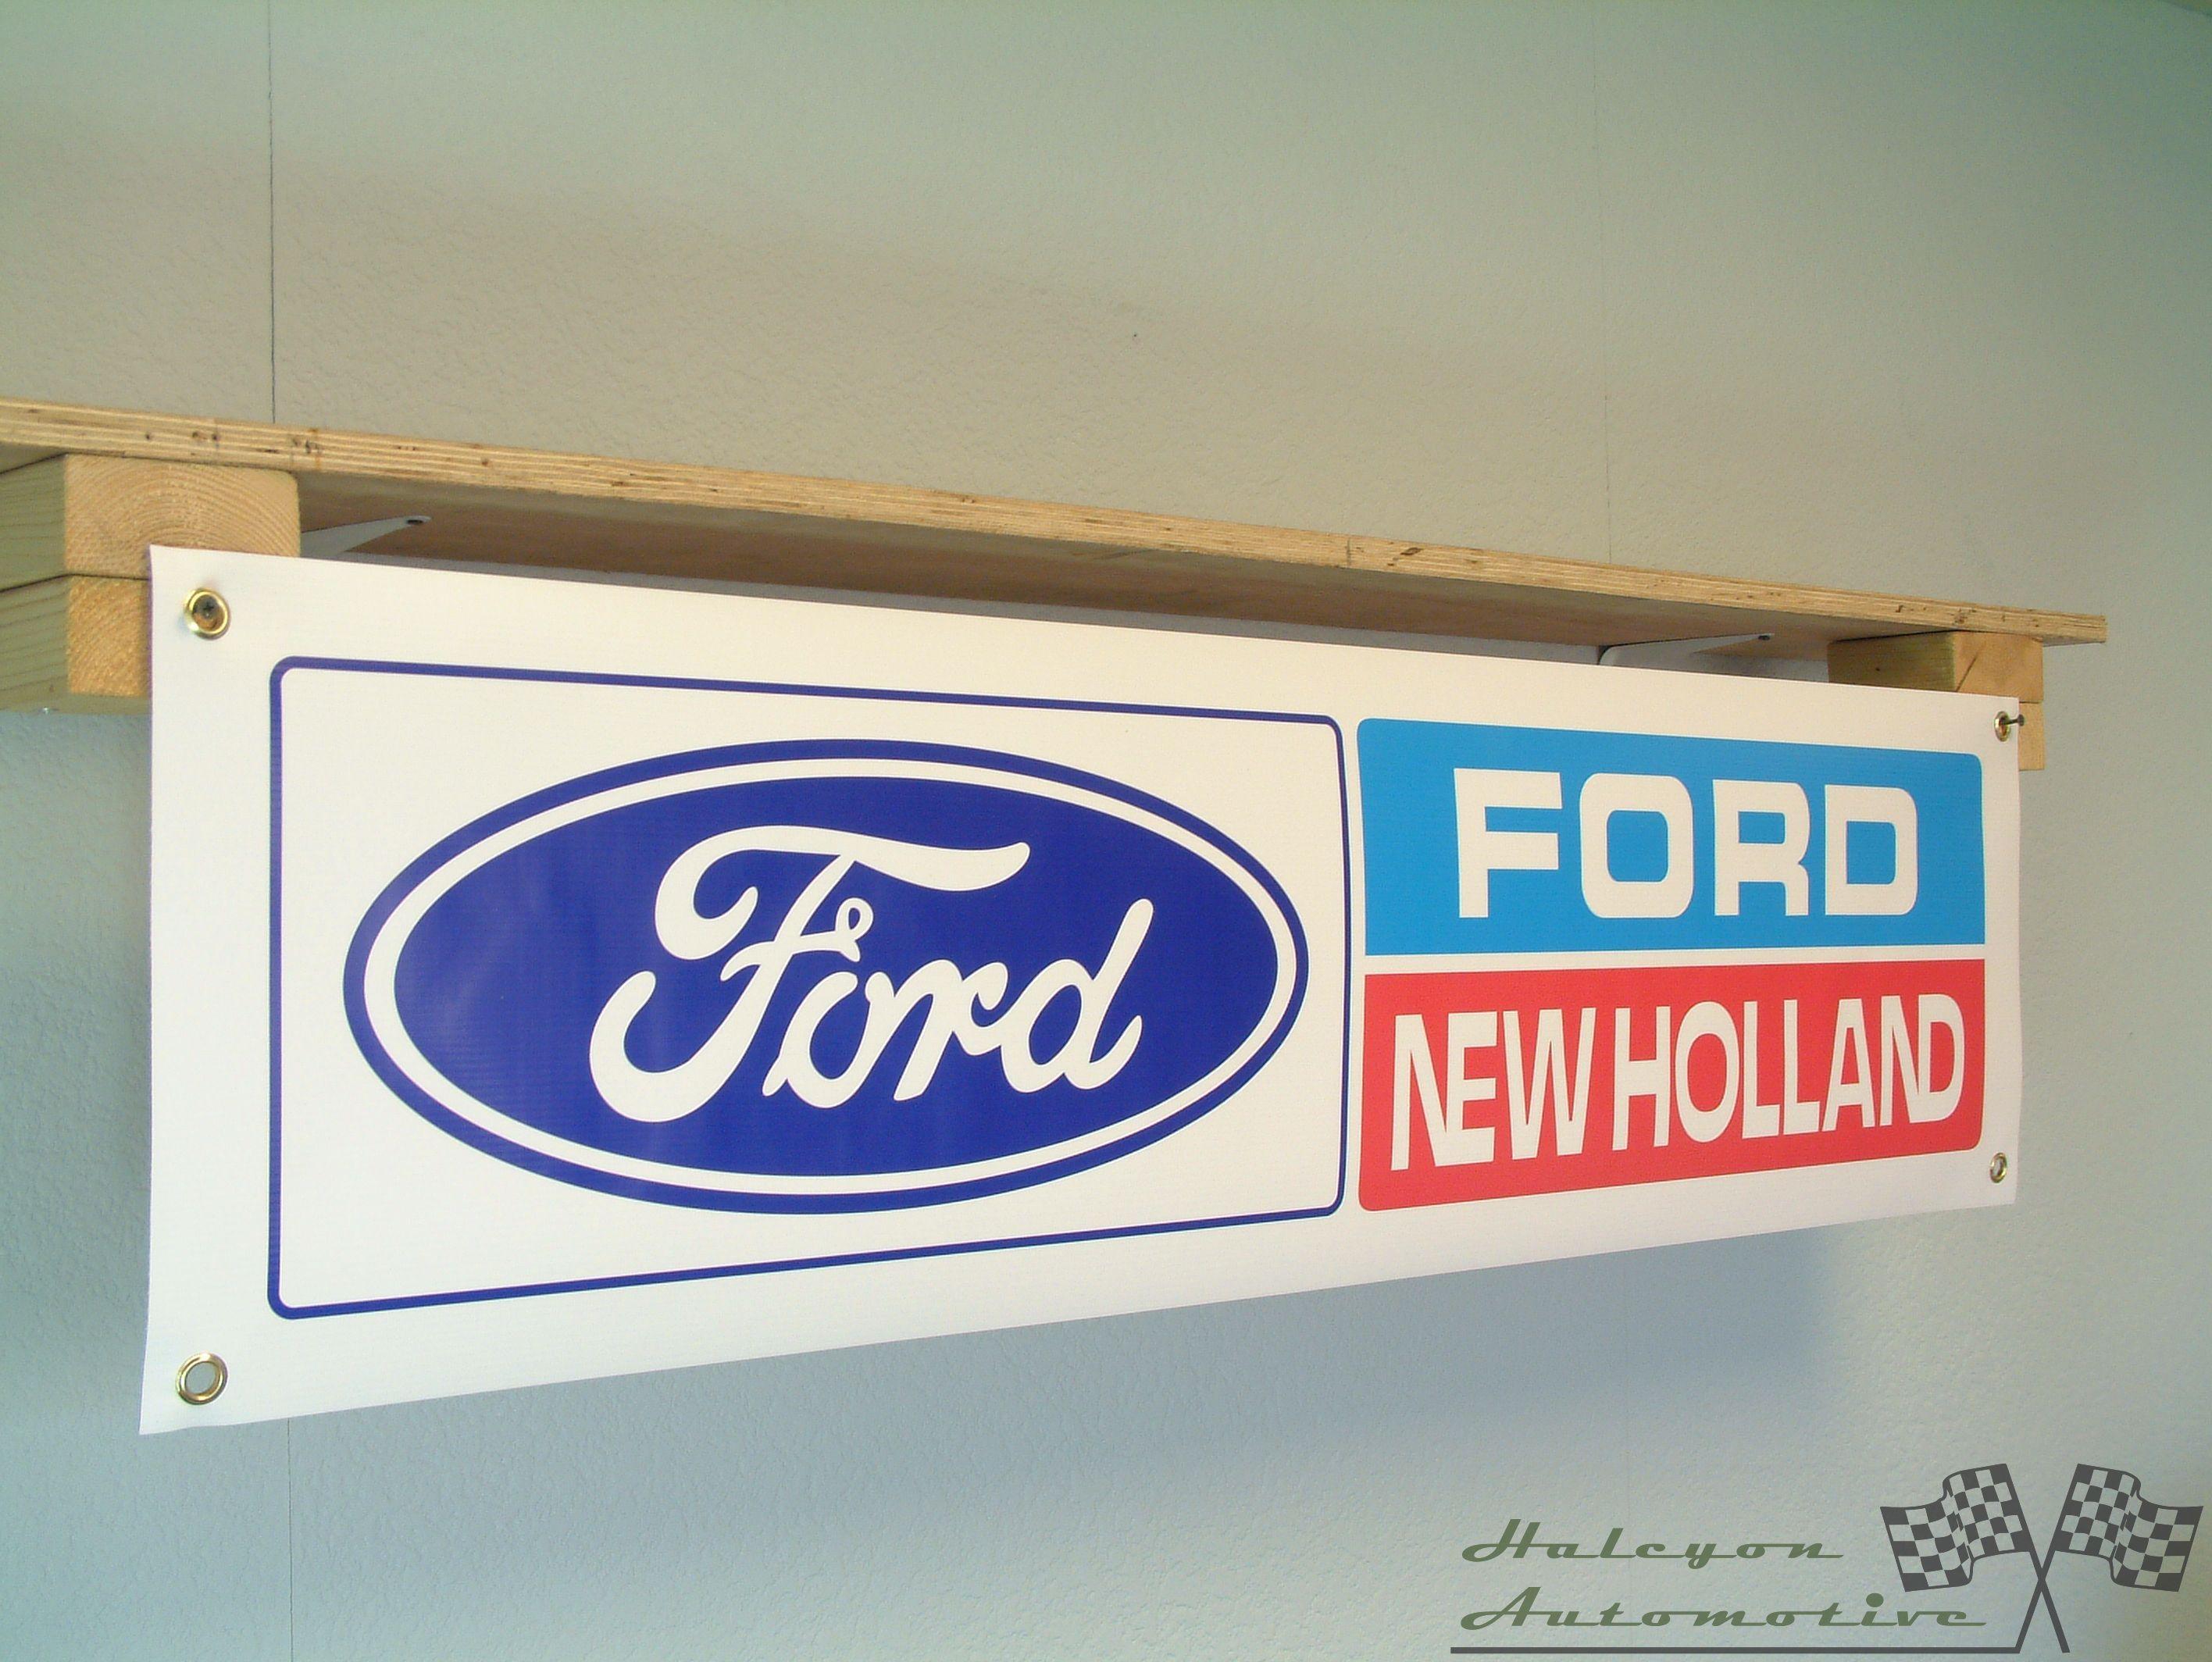 Ford New Holland Logo - Ford New Holland Banner tractor shed Display Workshop pvc sign | eBay